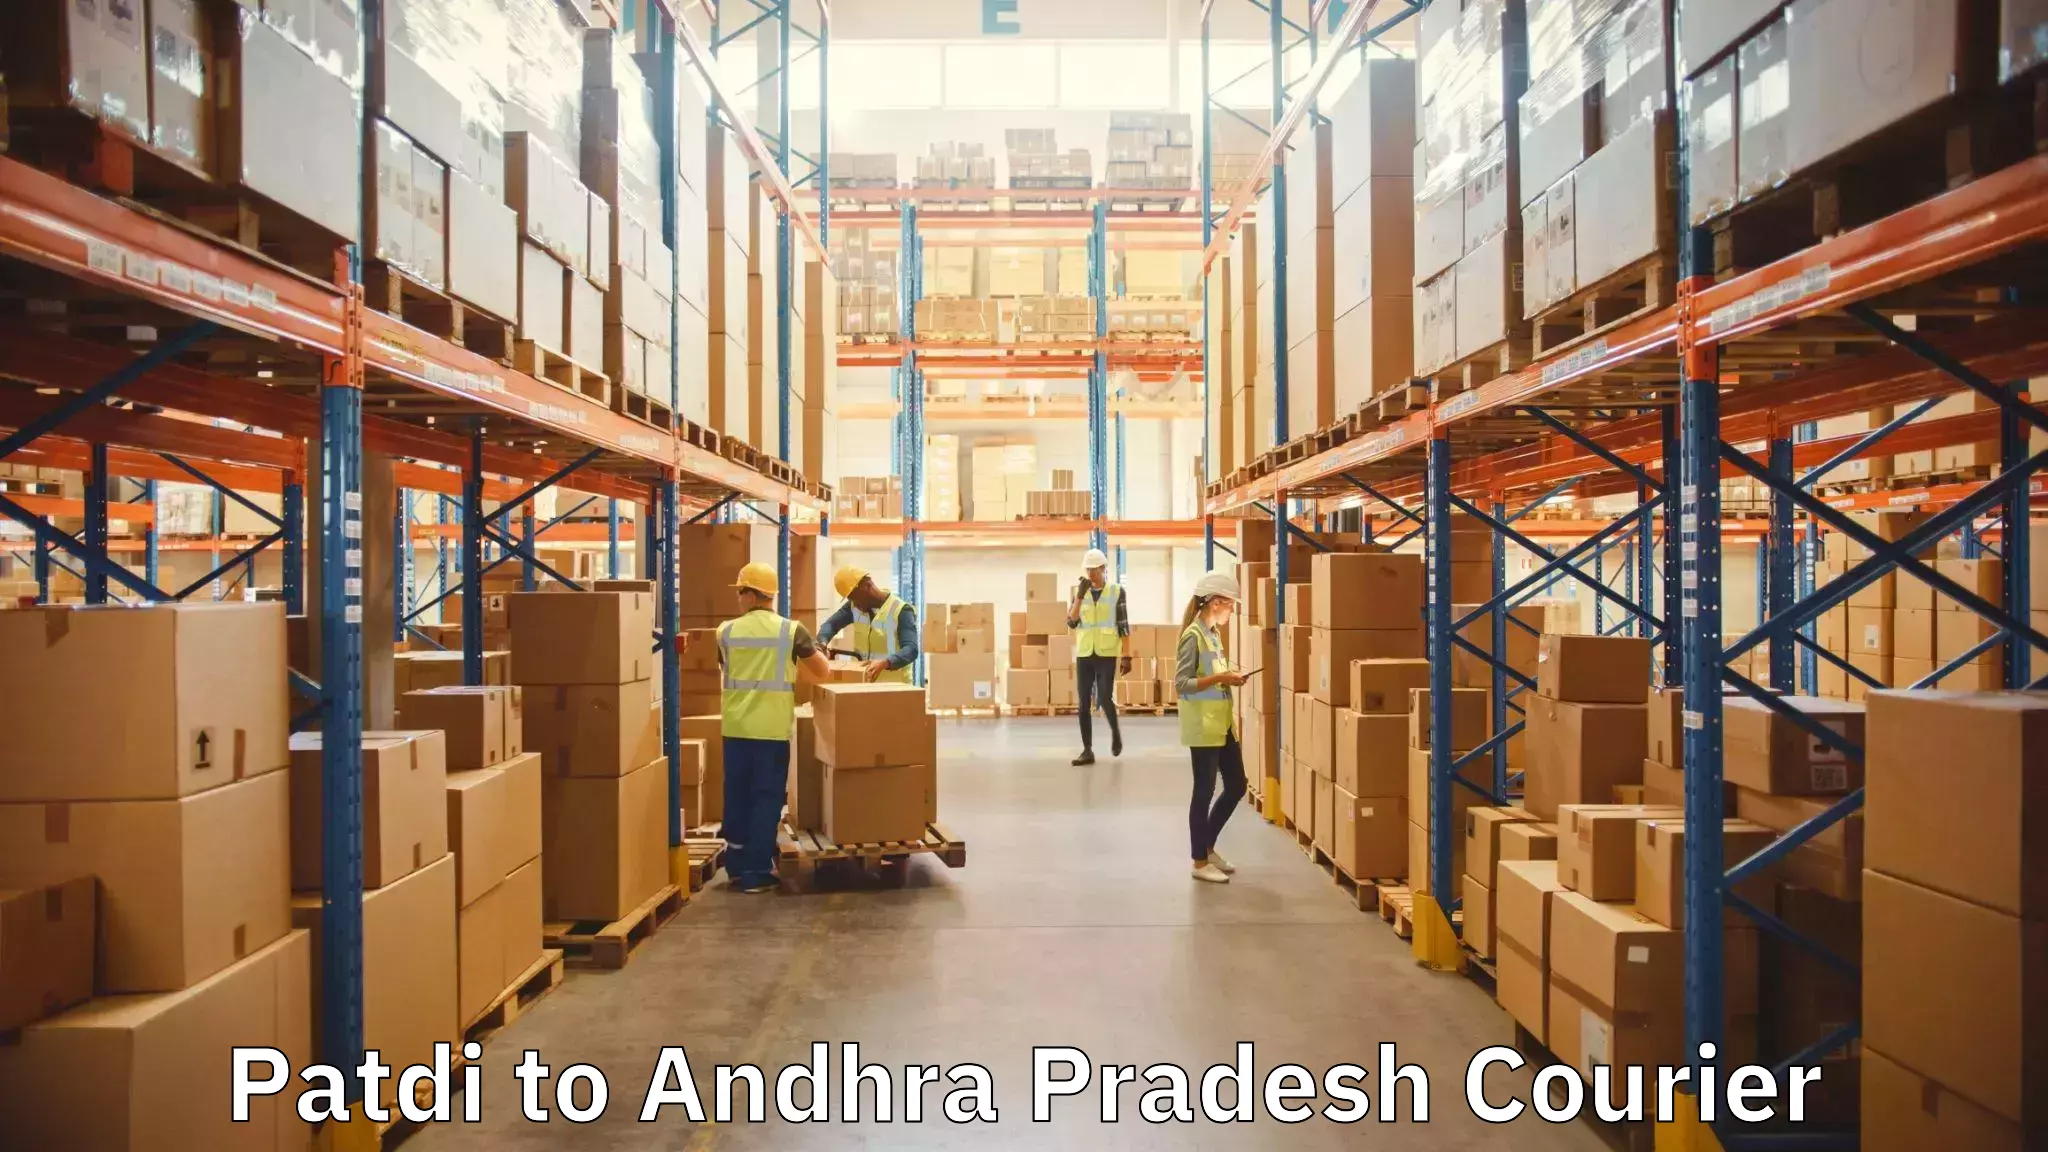 Reliable relocation services Patdi to Andhra Pradesh